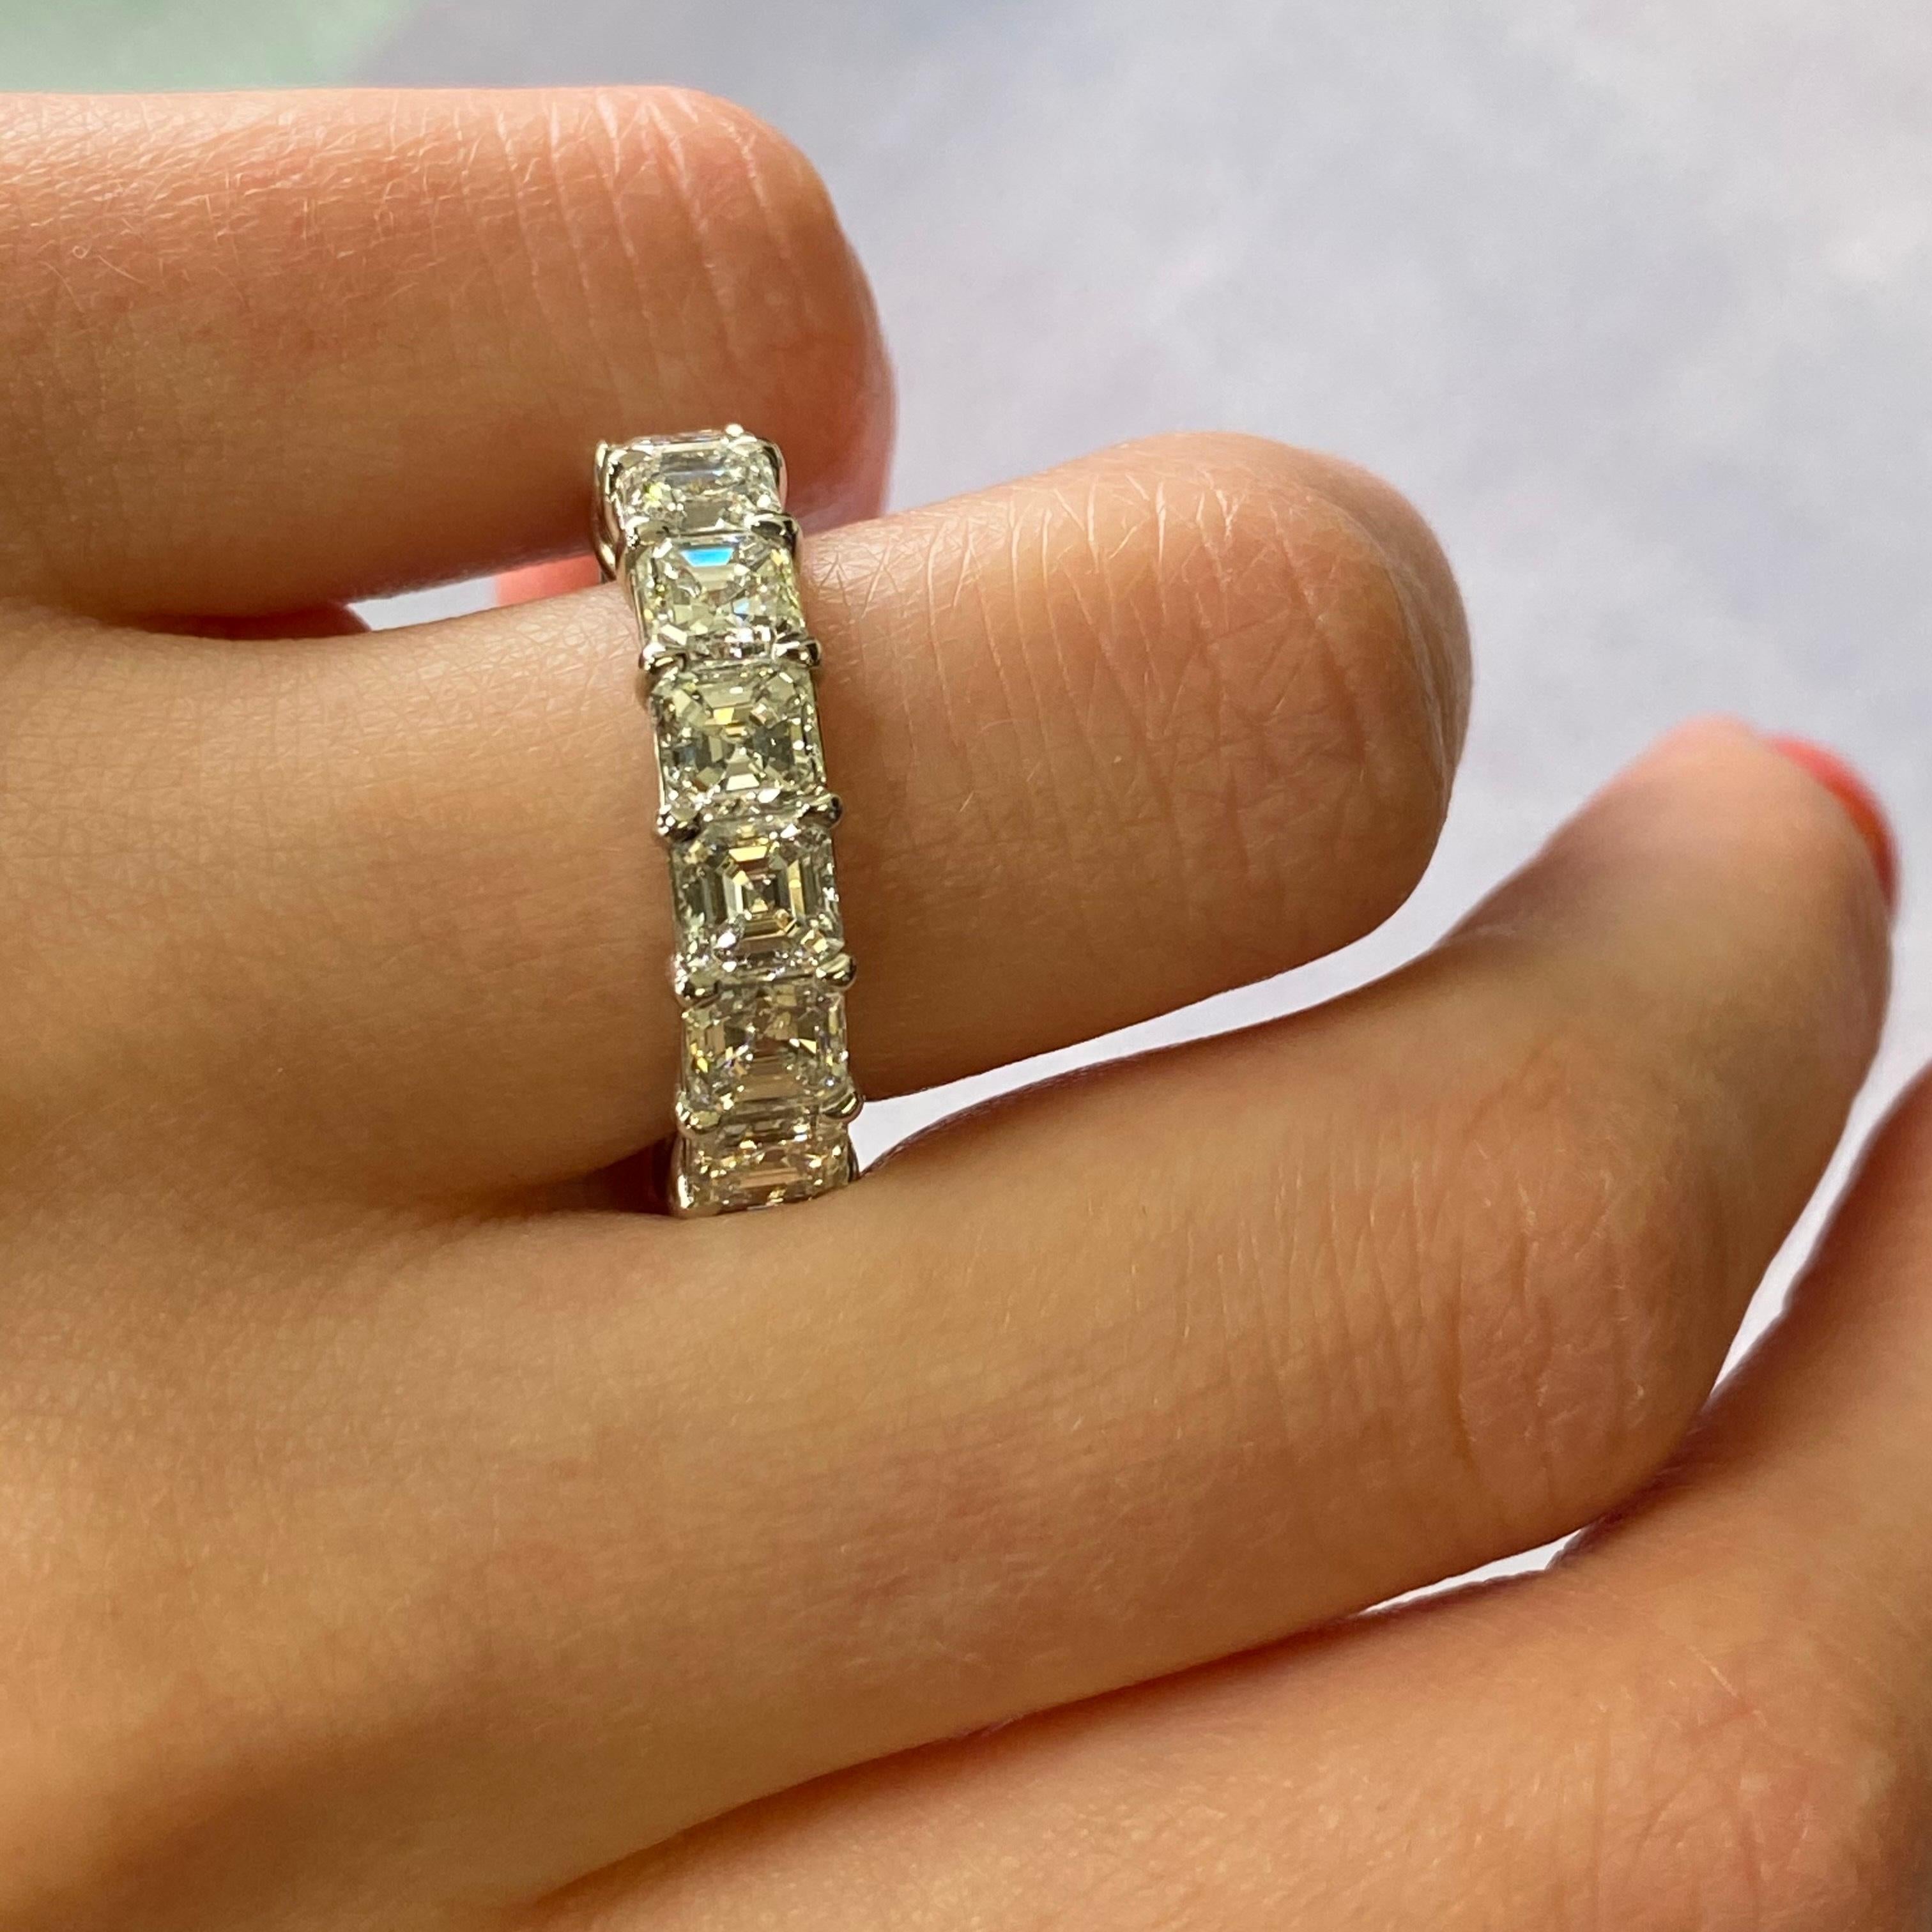 Asscher Cut Diamond Eternity Wedding Band Ring Platinum 8.13cttw In New Condition For Sale In New York, NY